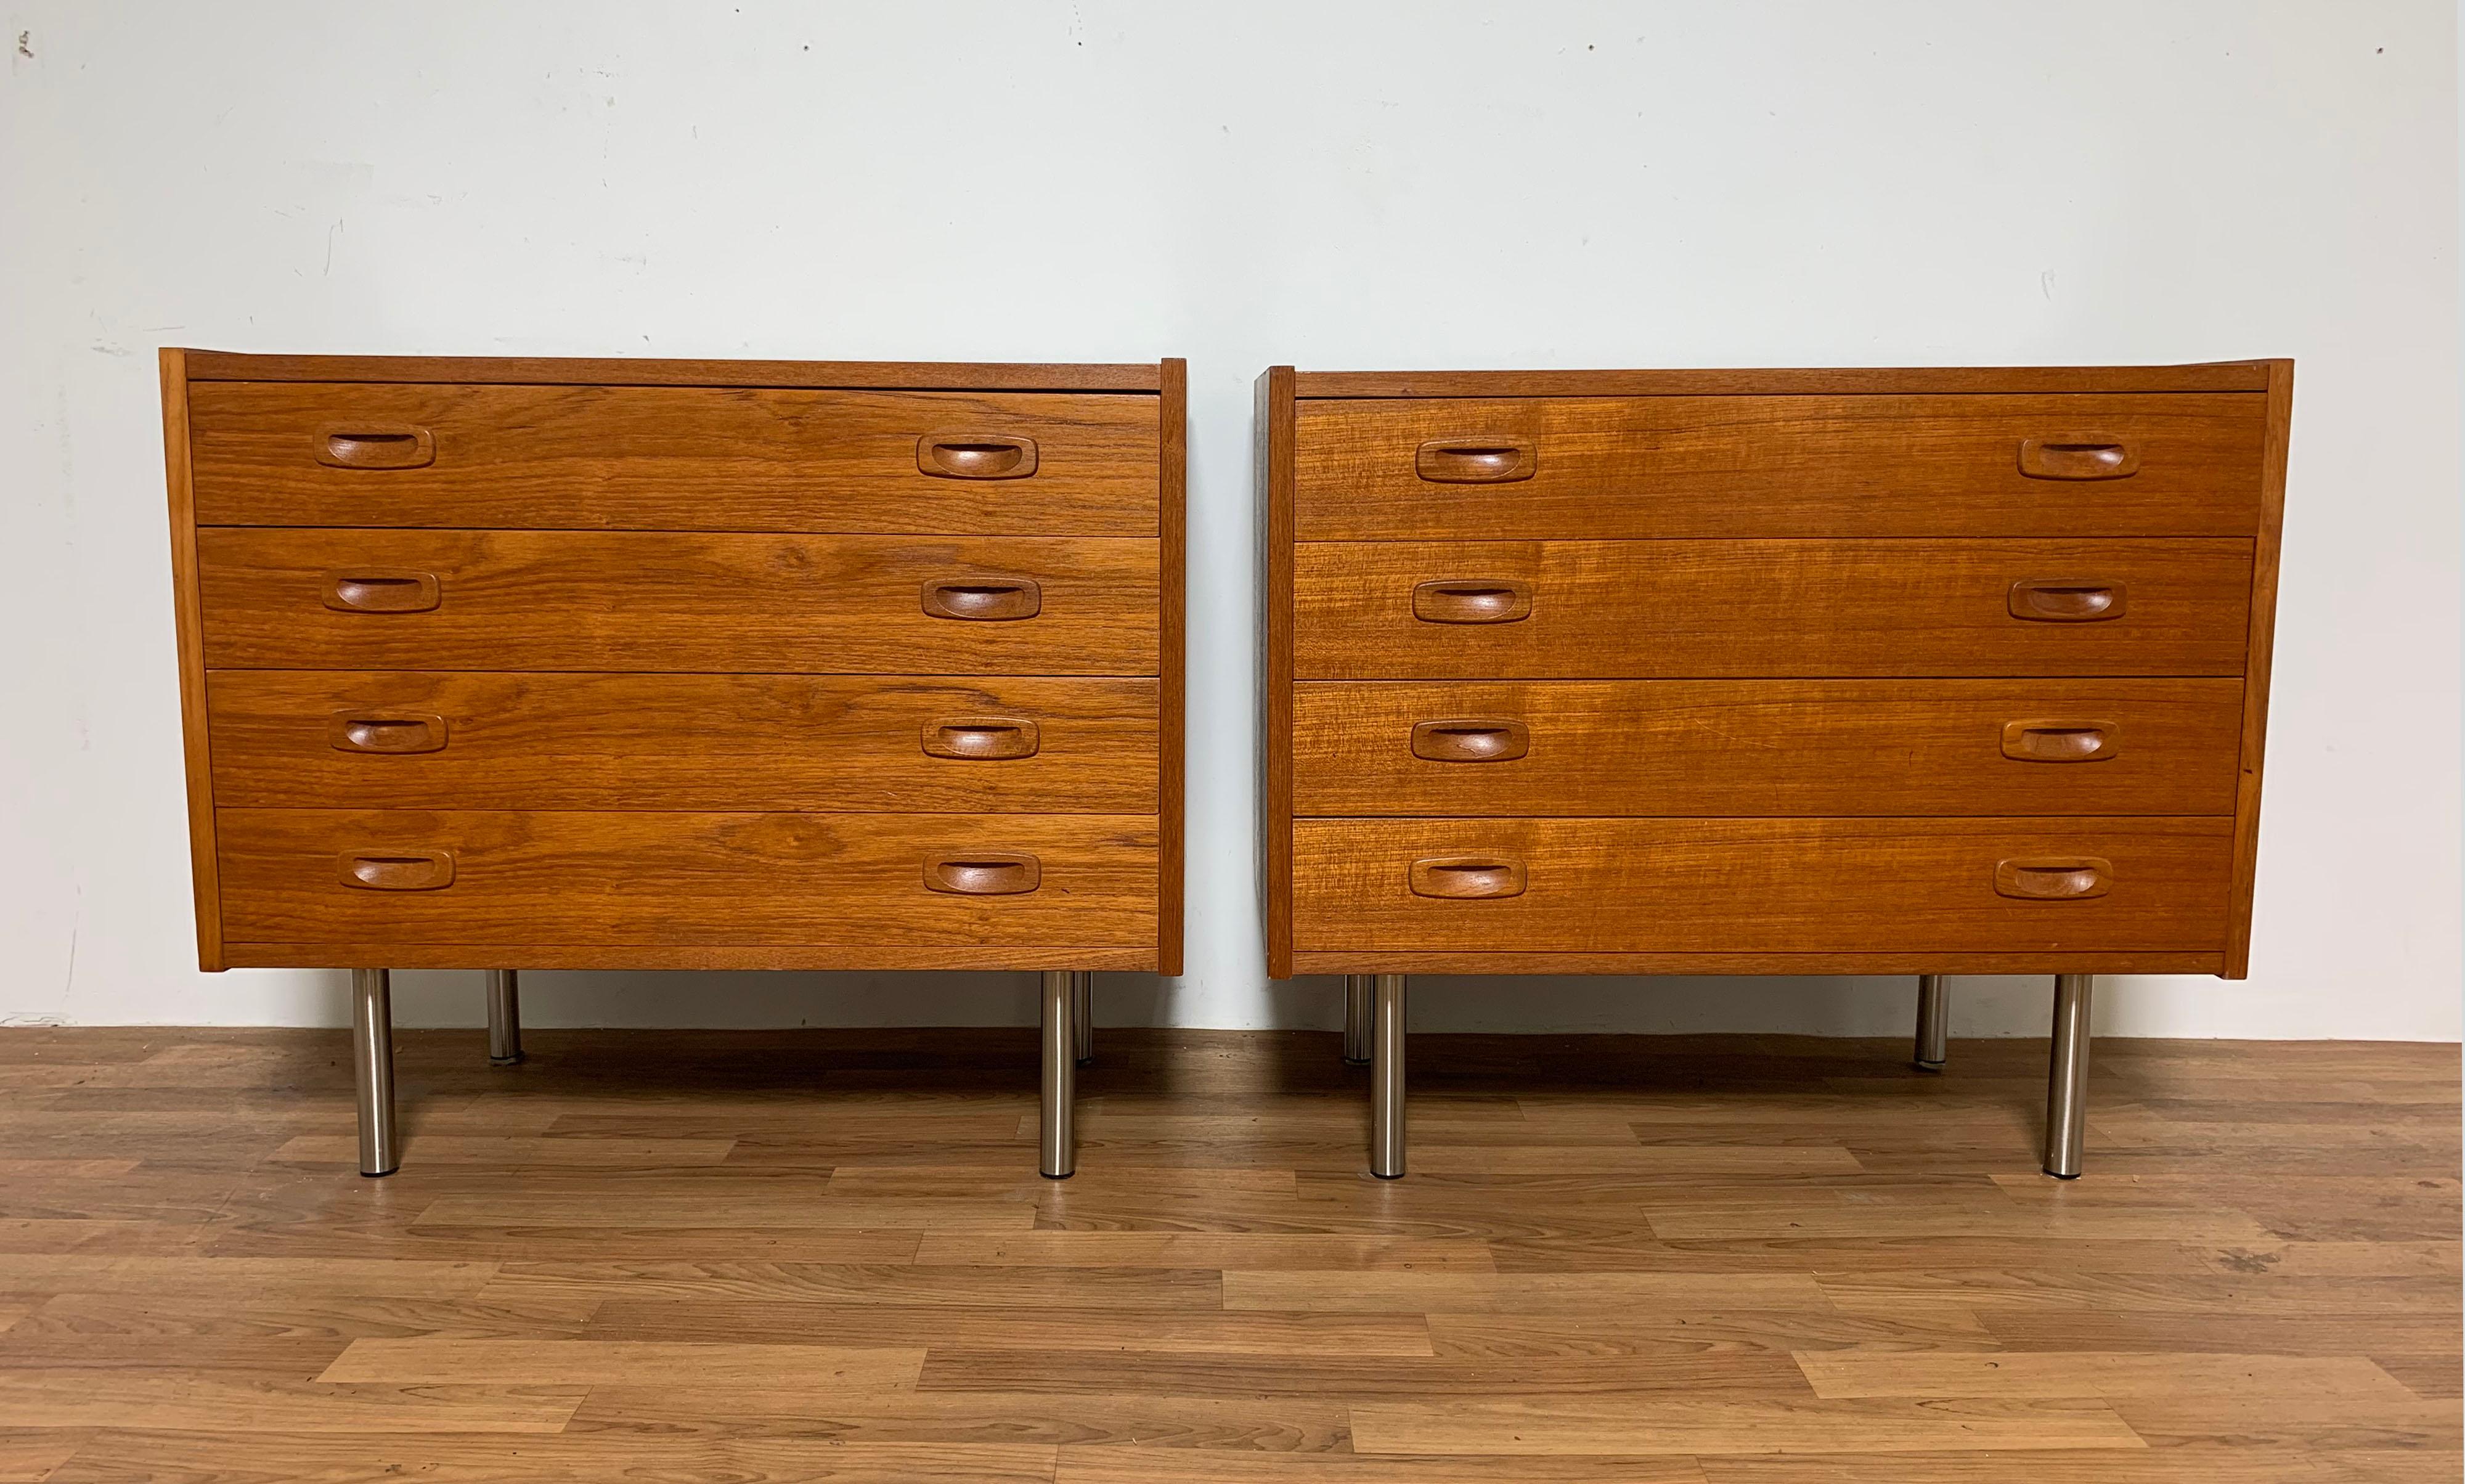 Pair of Danish teak four drawer dressing cabinets, circa 1960s. Formally two components of a PS wall mounted system, designed by Prebend Sorensen for Randers Mobelfabrik, converted by prior owner to two free standing cabinets on metal legs.